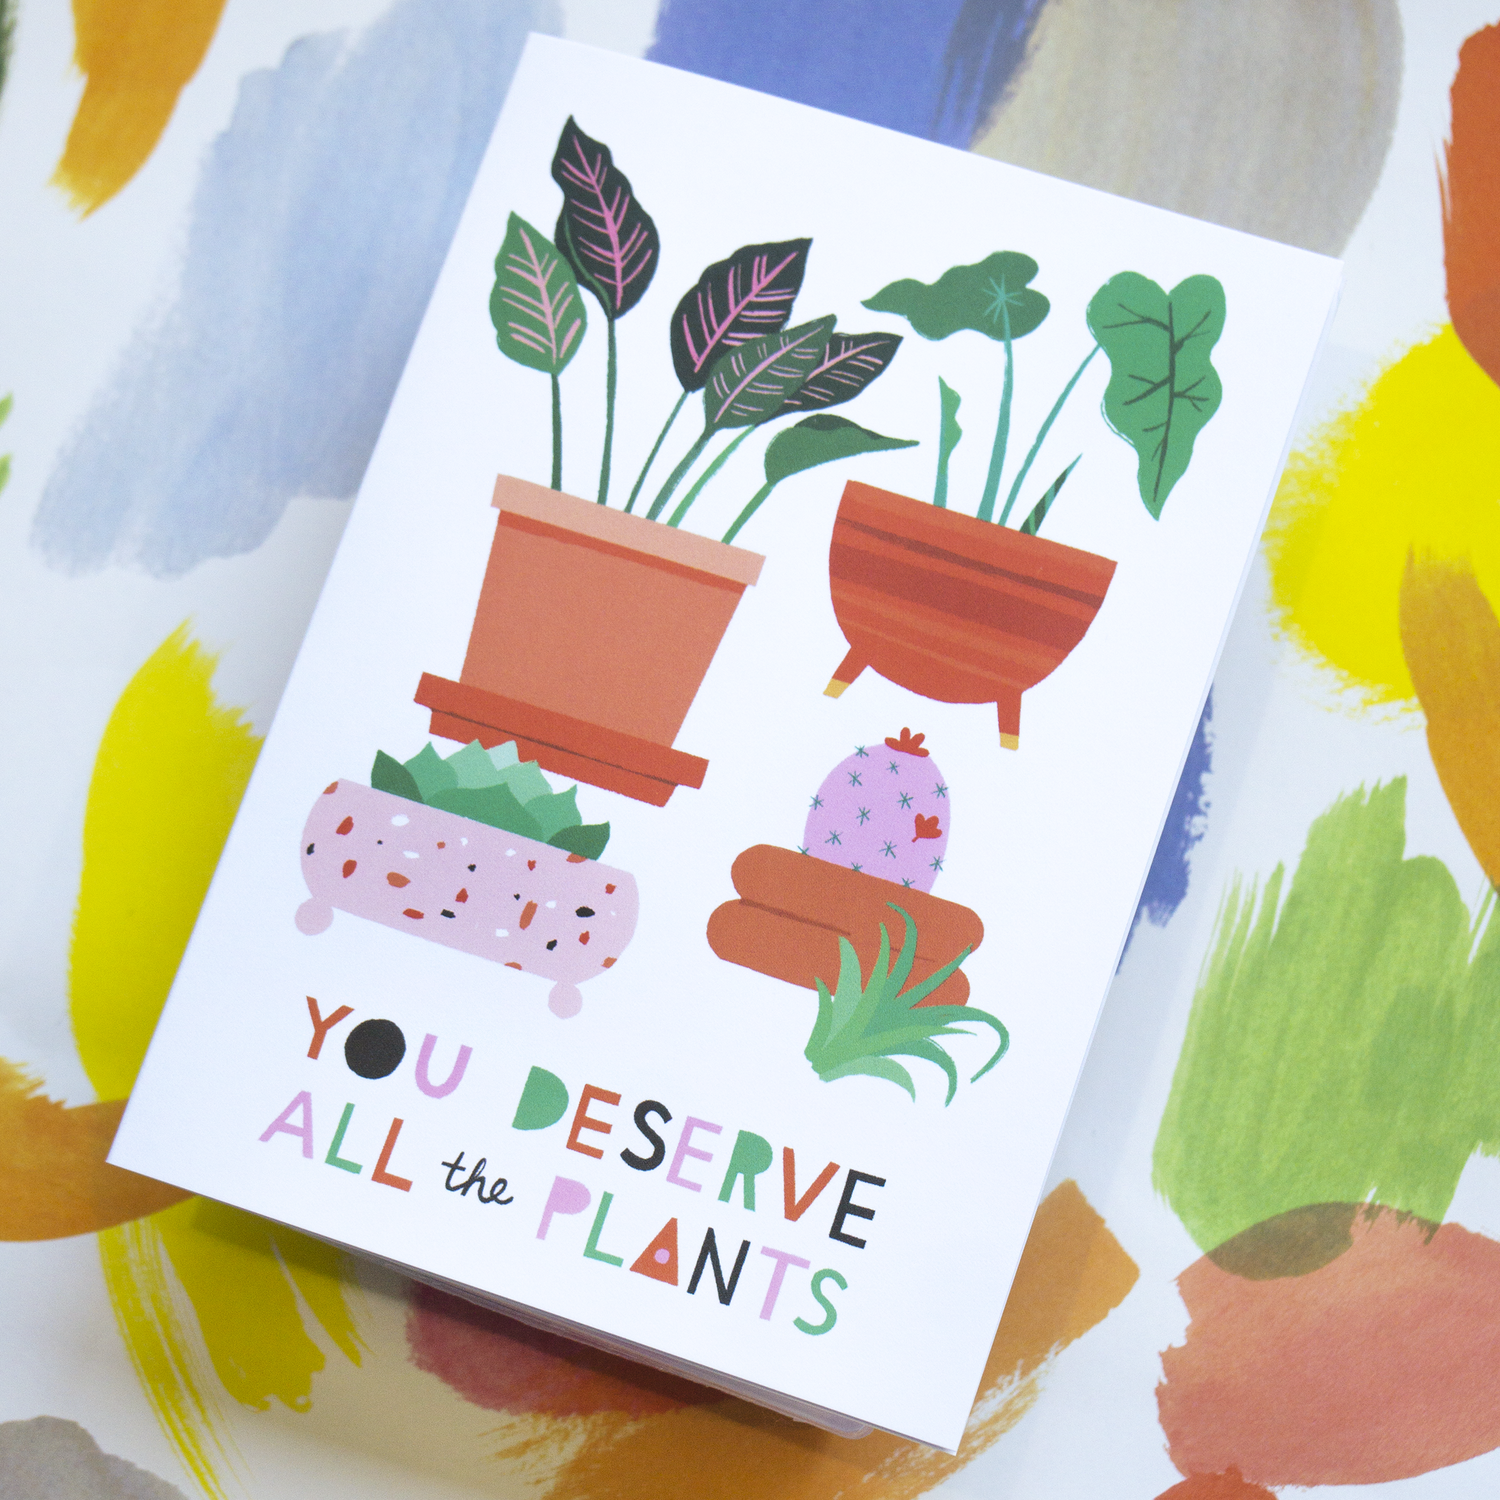 Card - You Deserve All the Plants